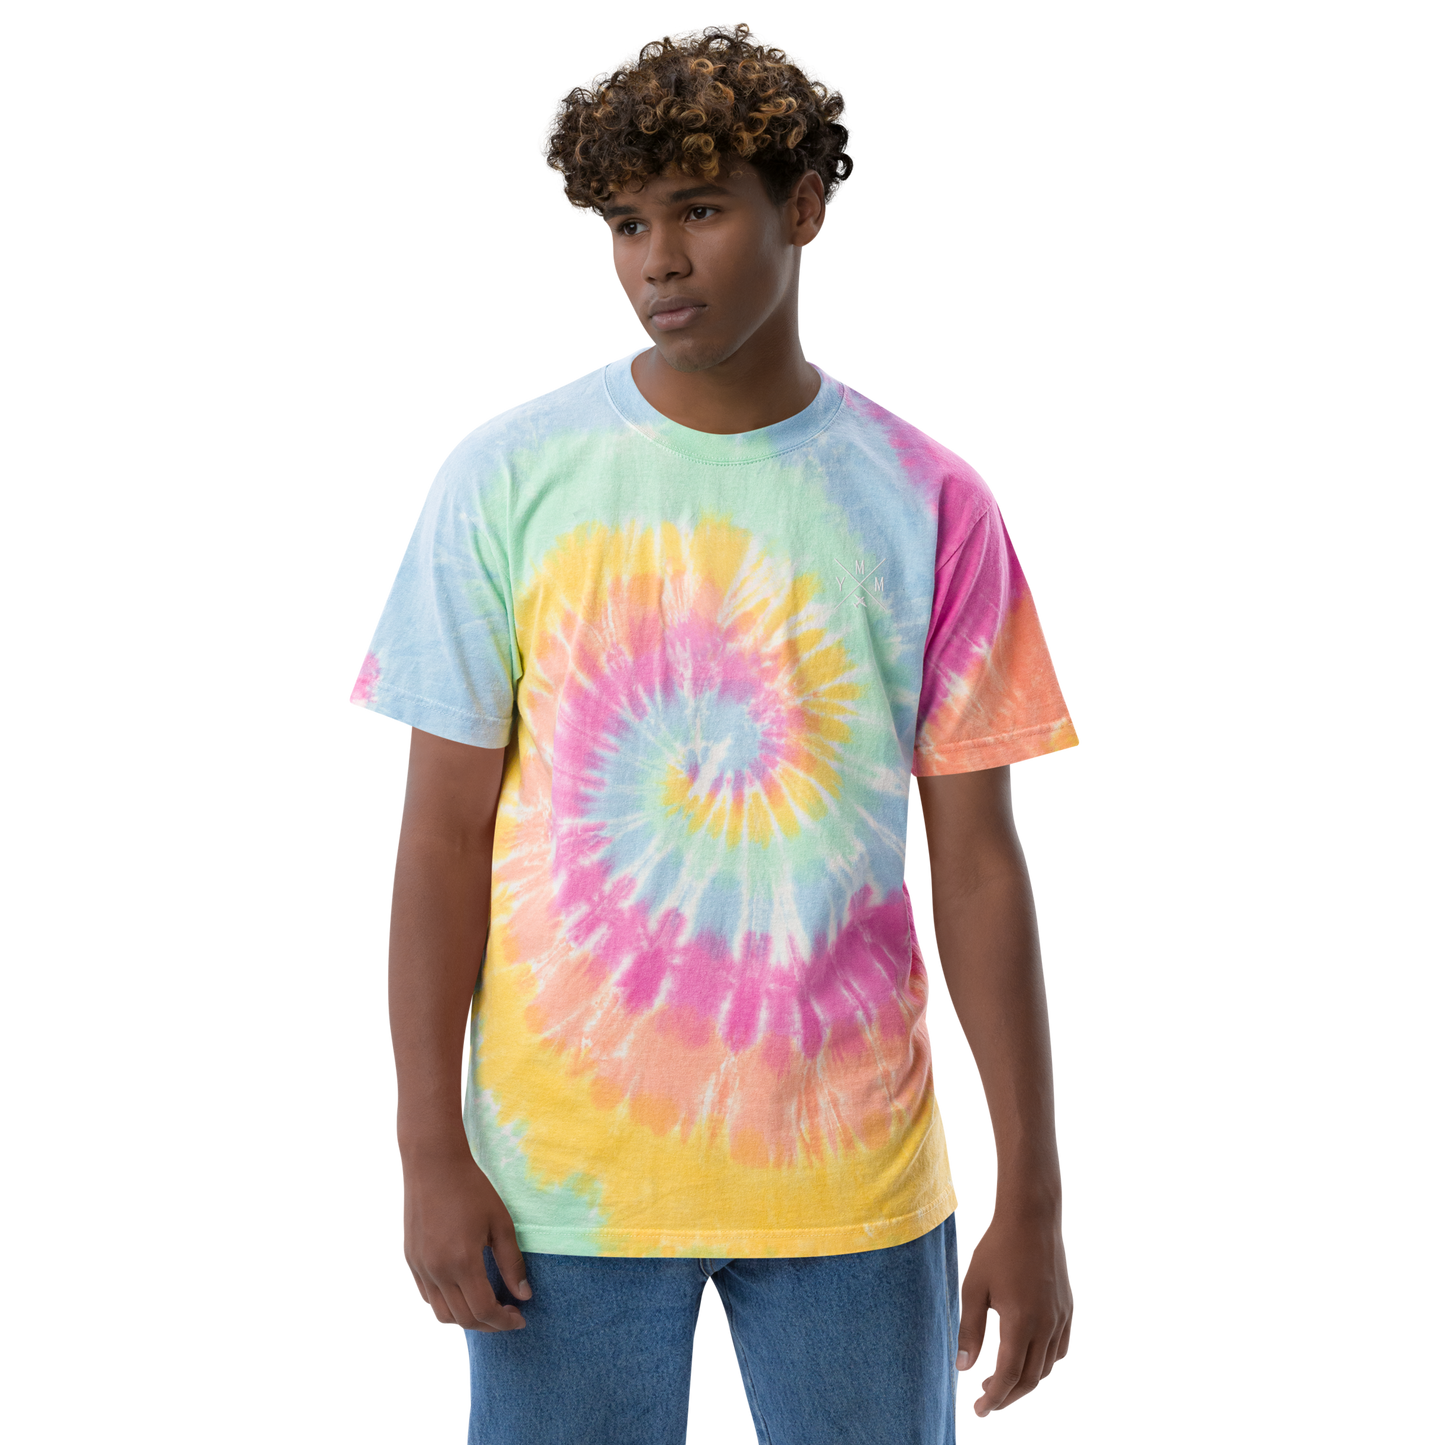 Crossed-X Oversized Tie-Dye T-Shirt • YMM Fort McMurray • YHM Designs - Image 04